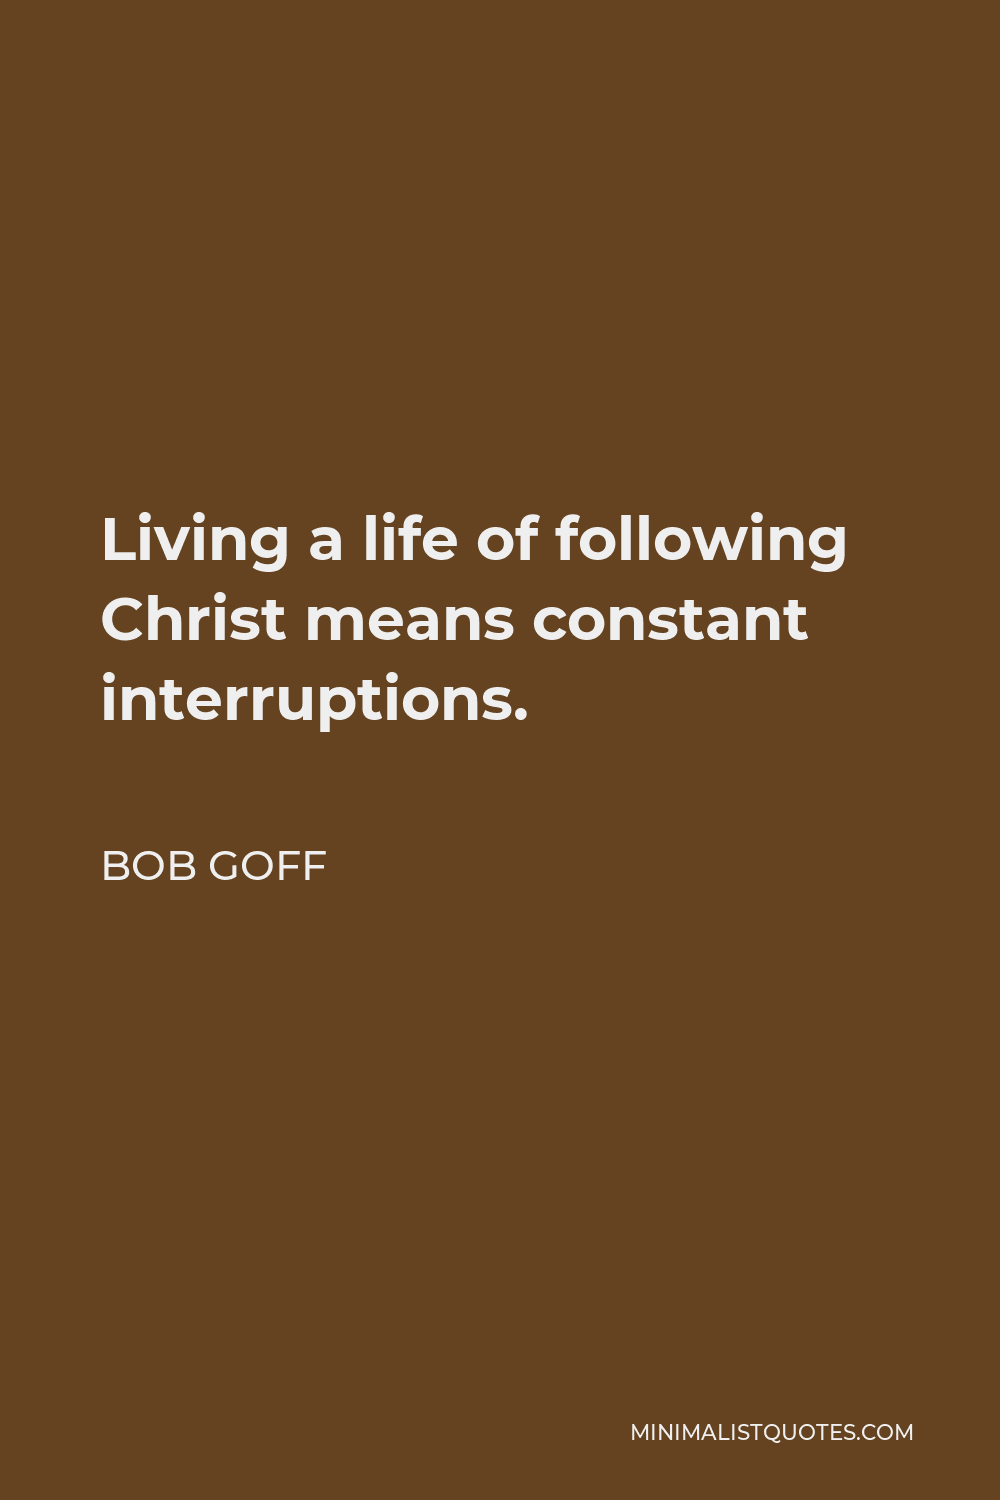 Bob Goff Quote - Living a life of following Christ means constant interruptions.